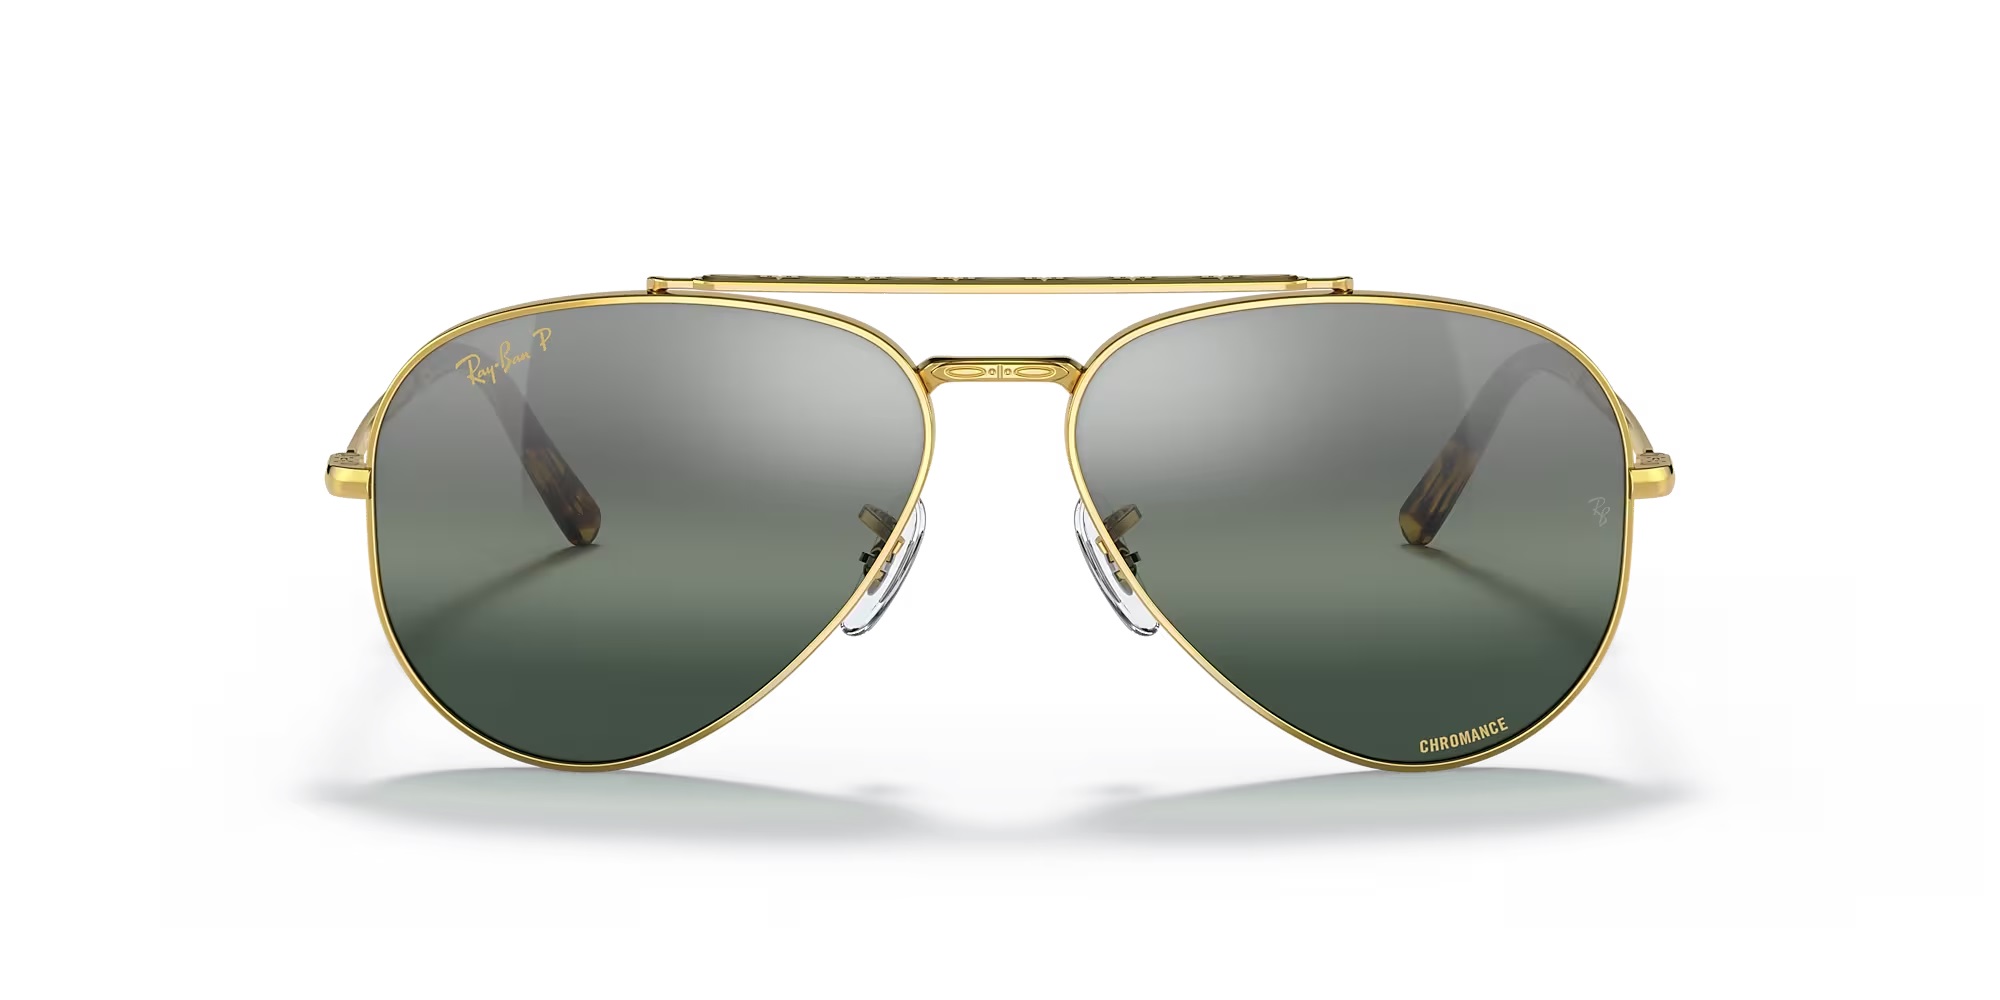 RB3625 Aviators by Ray-Ban